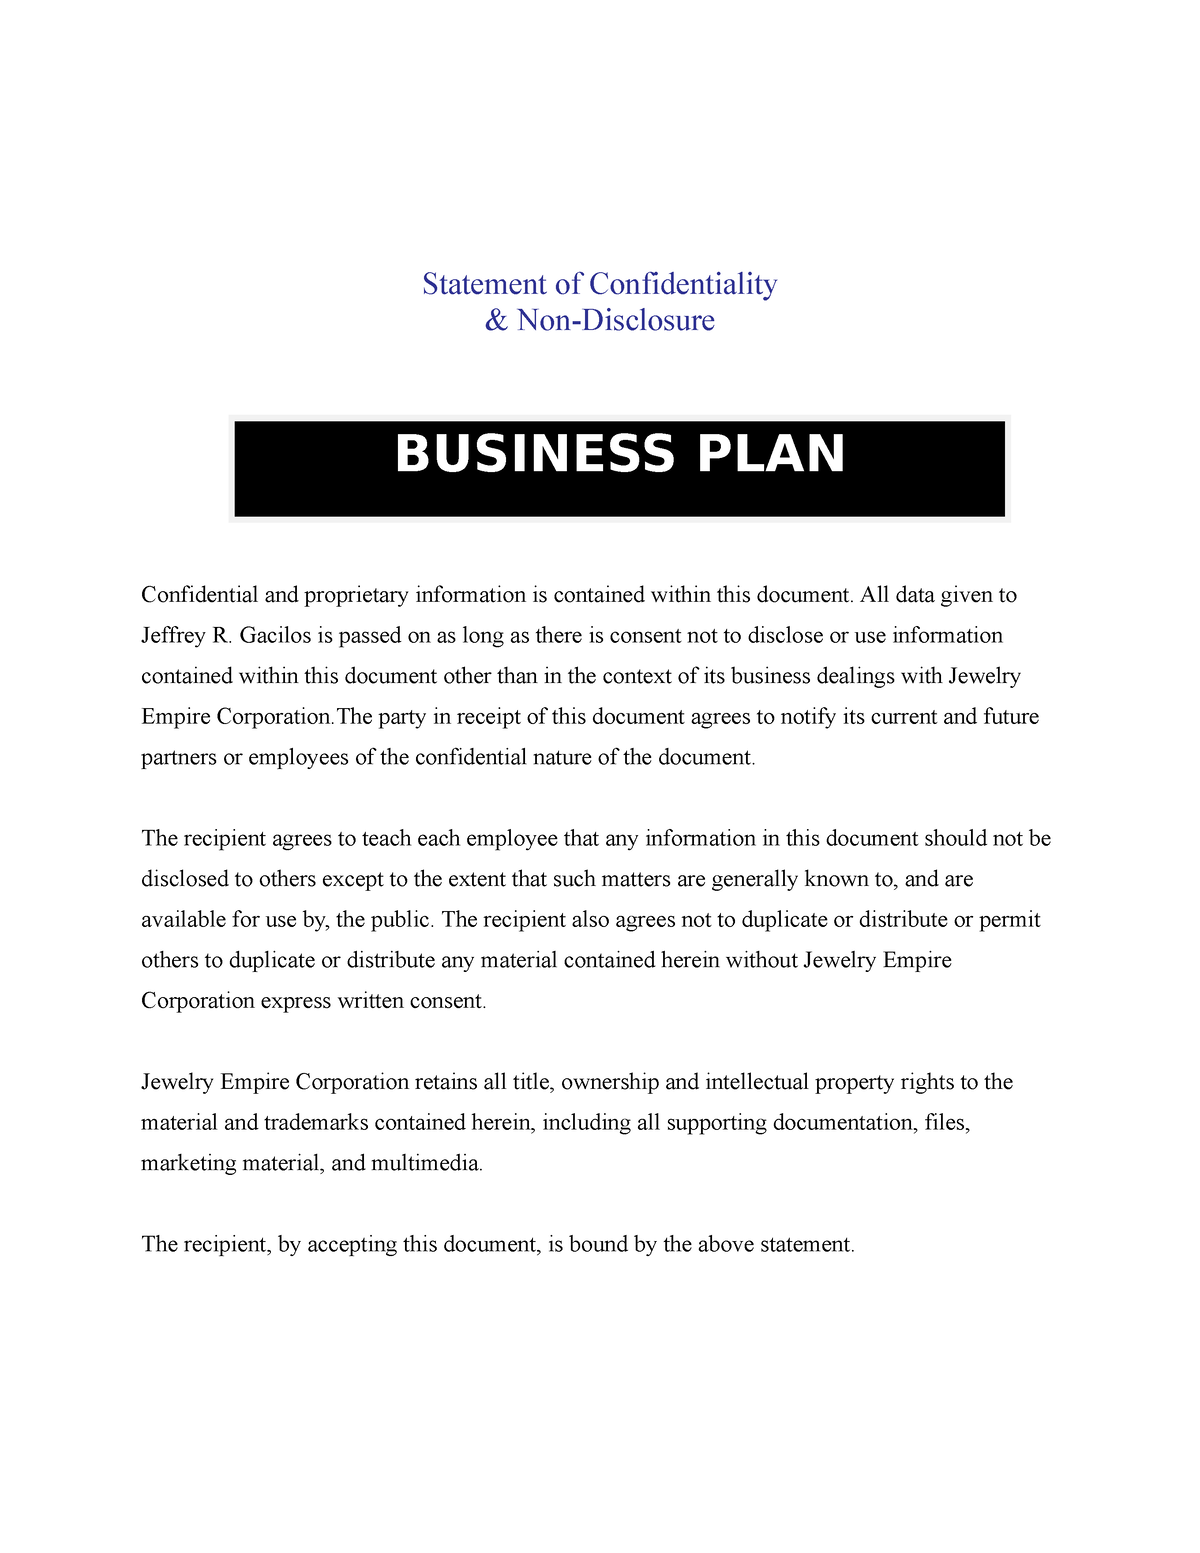 Business Plan Template - SIR Erick - Statement of Confidentiality & Non ...